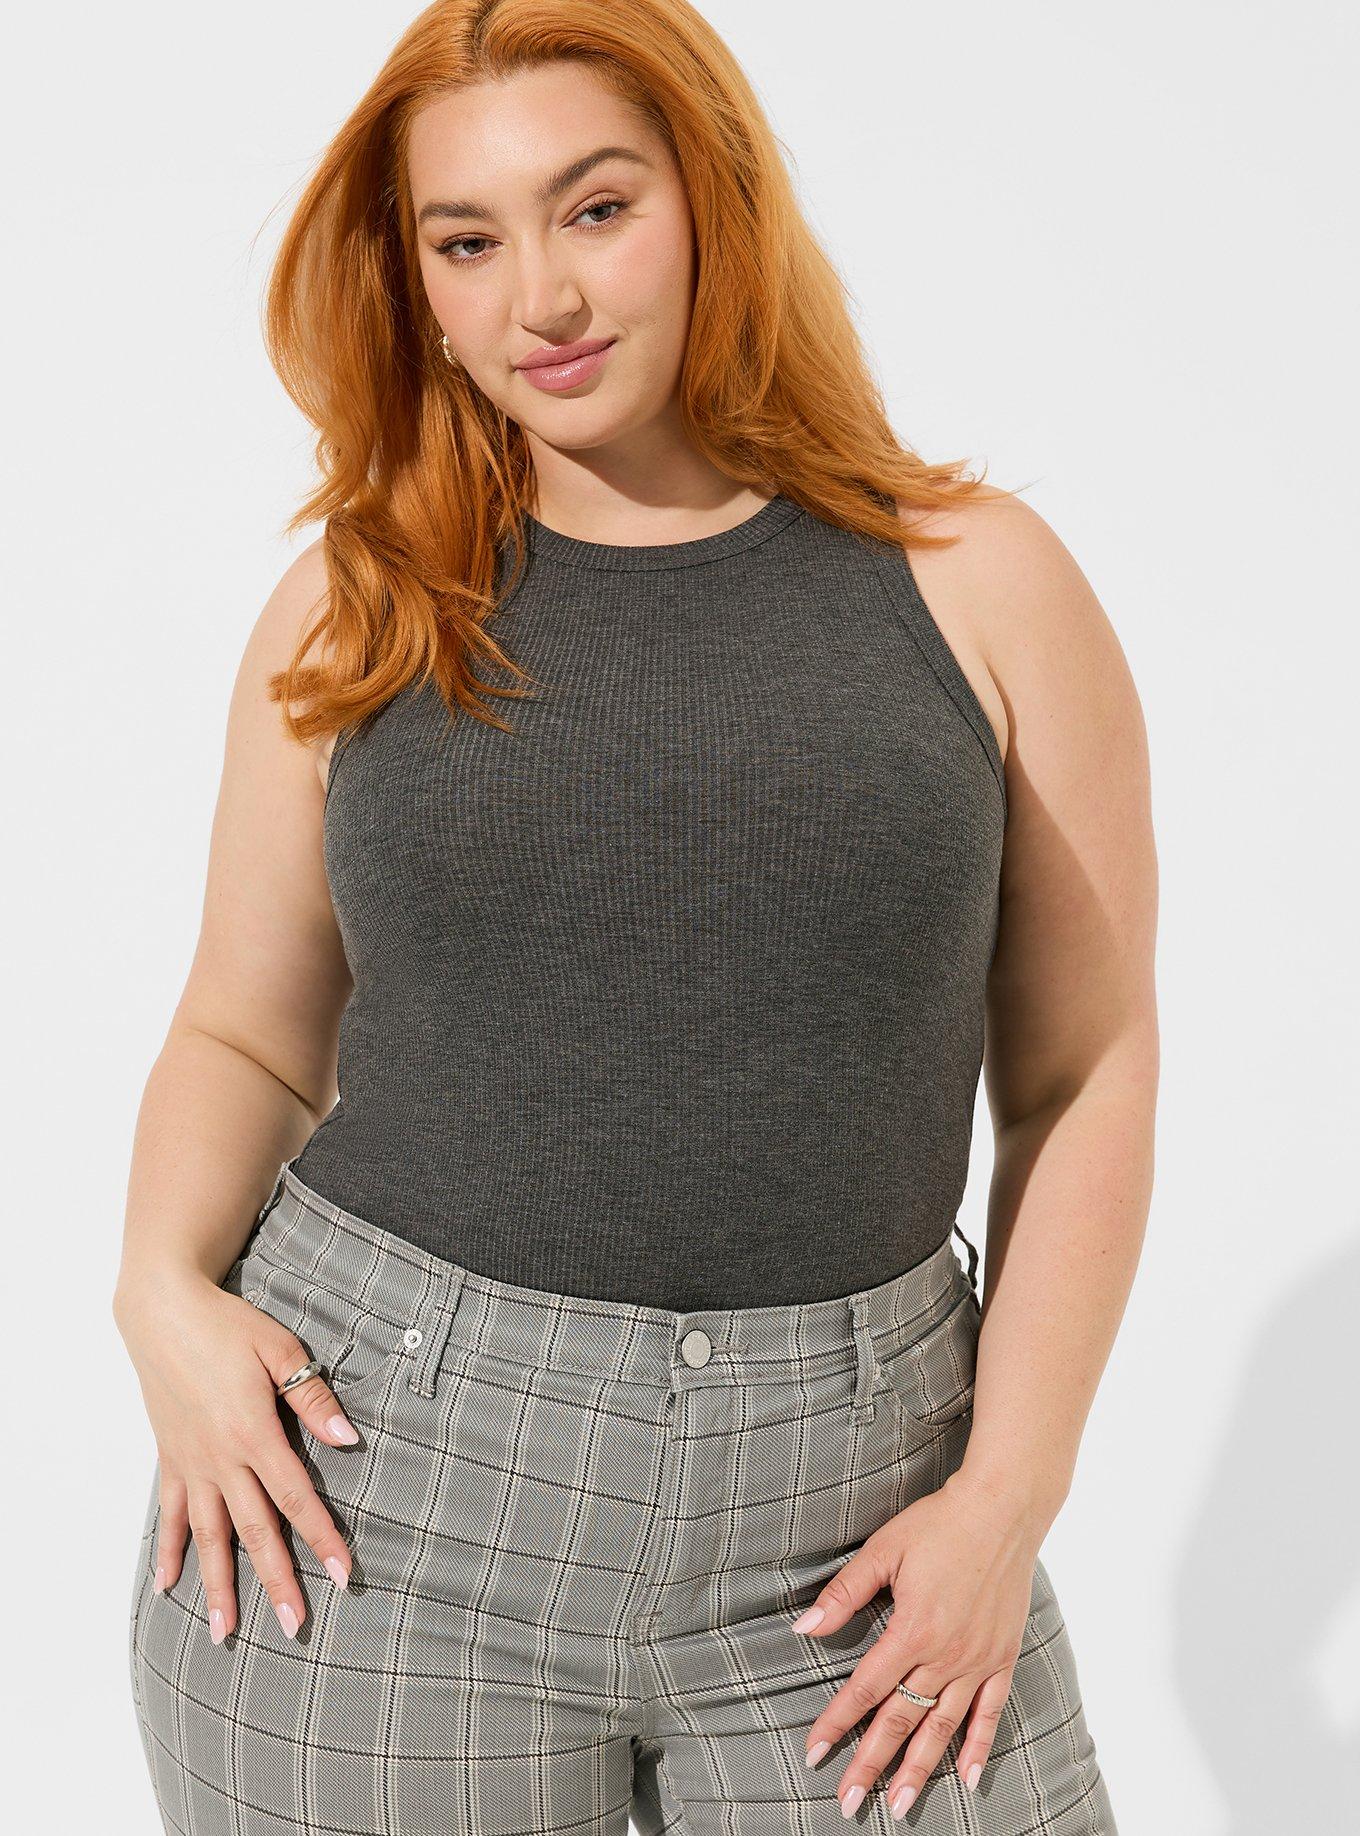 Torrid Plus Size Women's Clothing for sale in Mint Valley